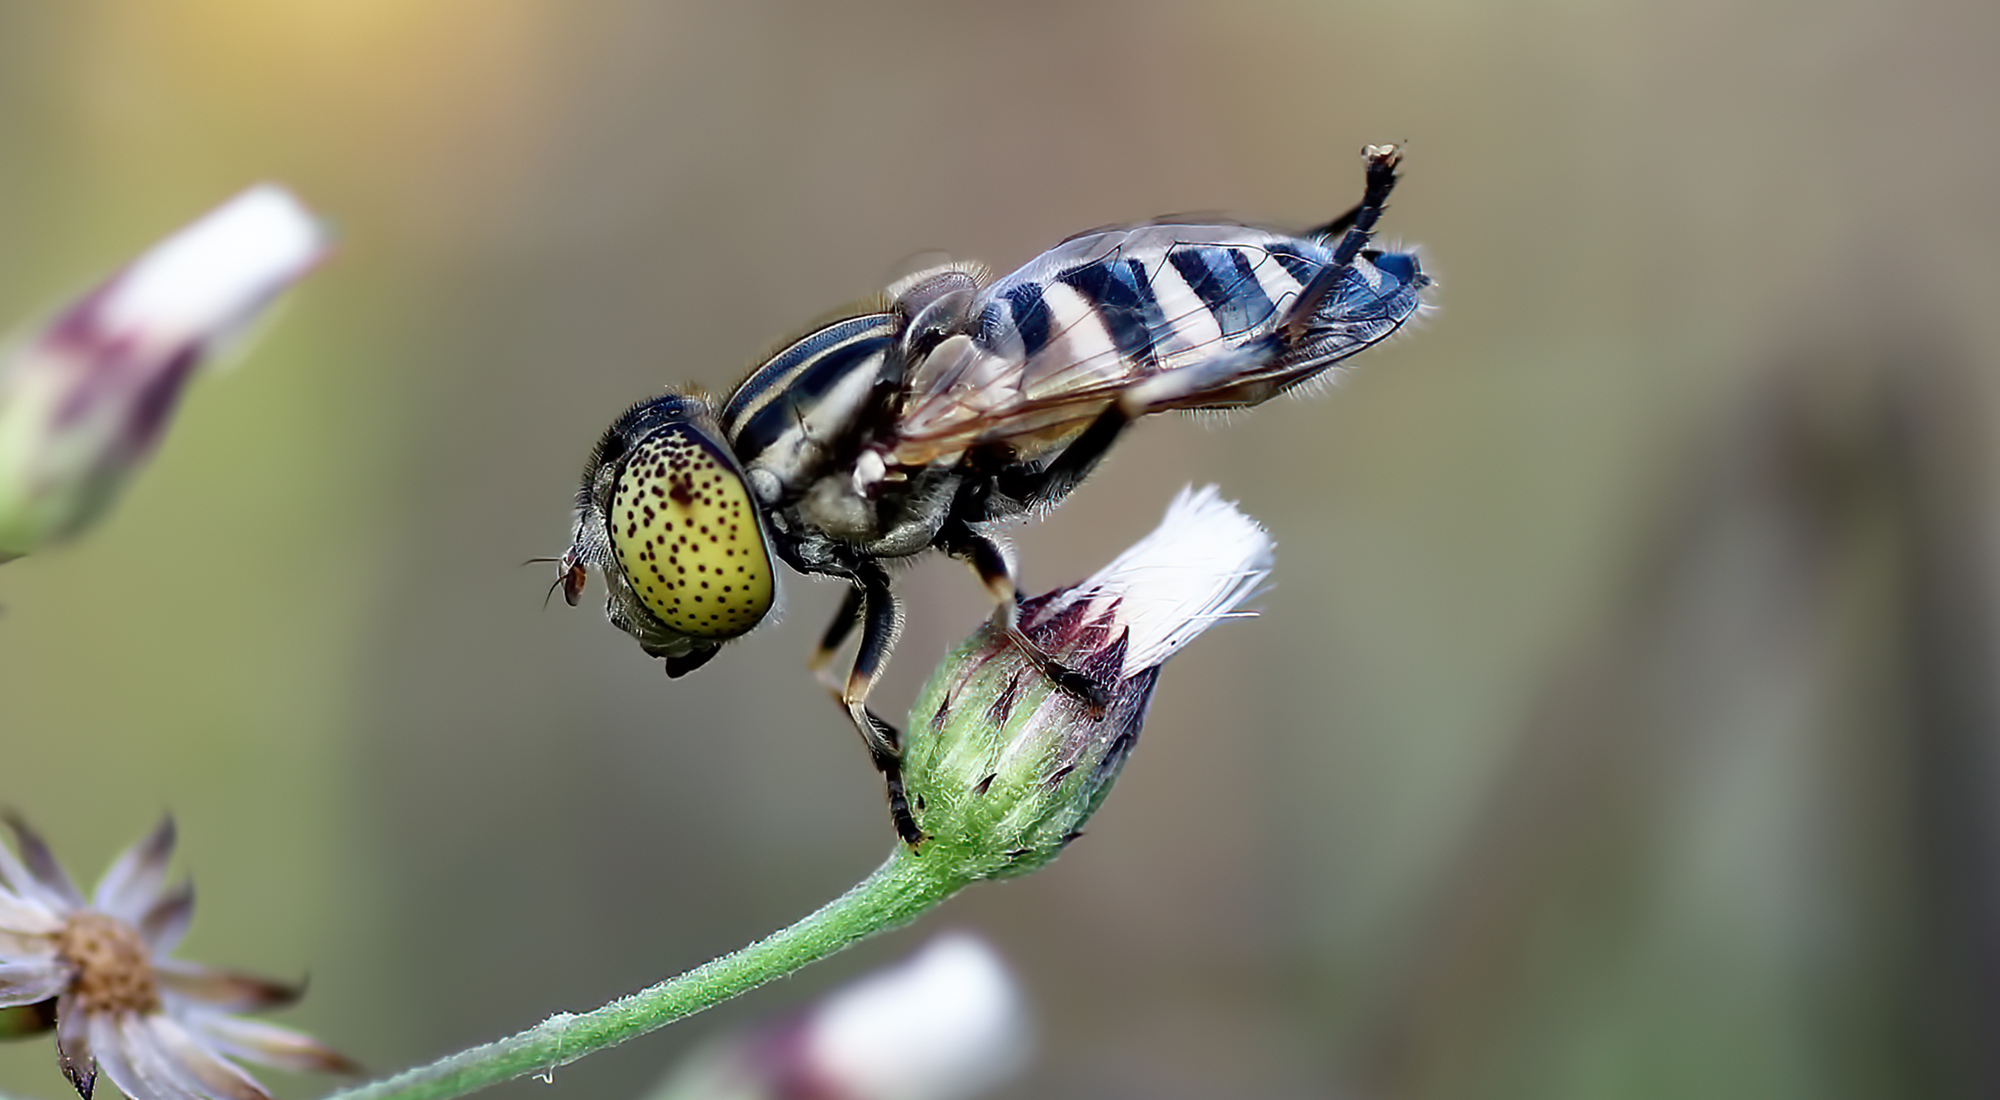 IUCN SSC Hoverfly Specialist Group